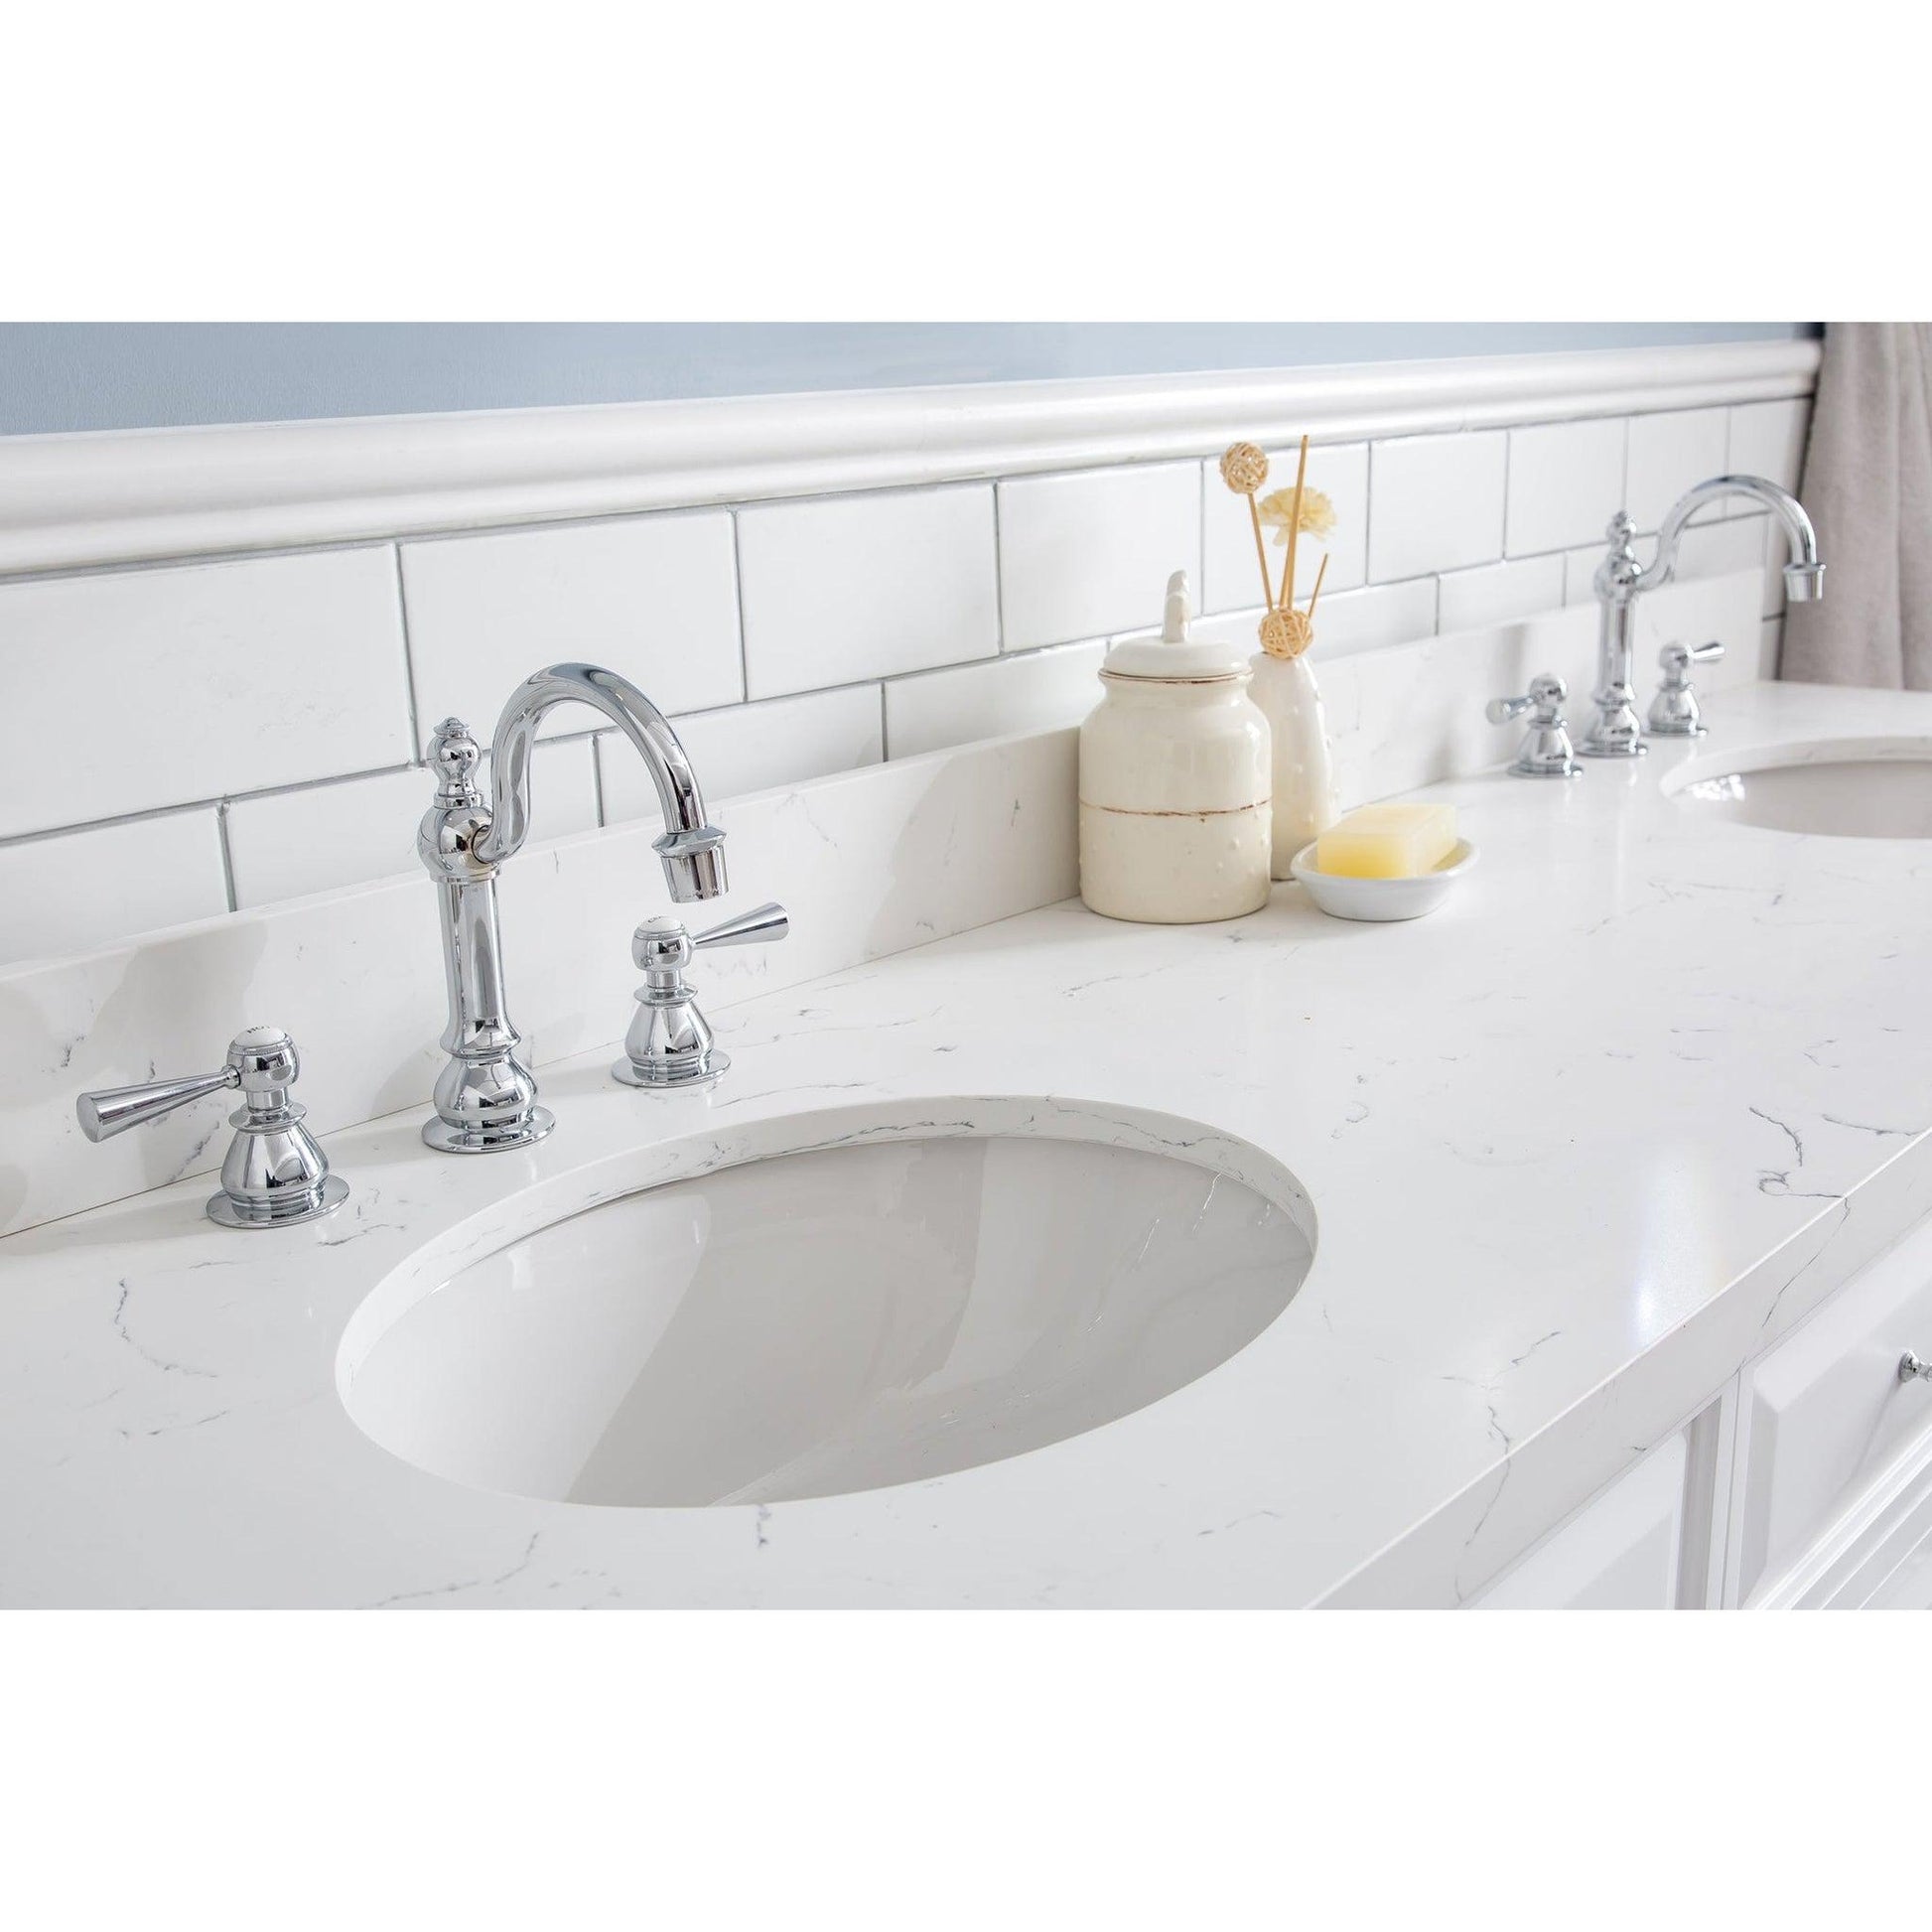 Water Creation Palace 72" Quartz Carrara Pure White Bathroom Vanity Set With Hardware And F2-0012 Faucets, Mirror in Chrome Finish